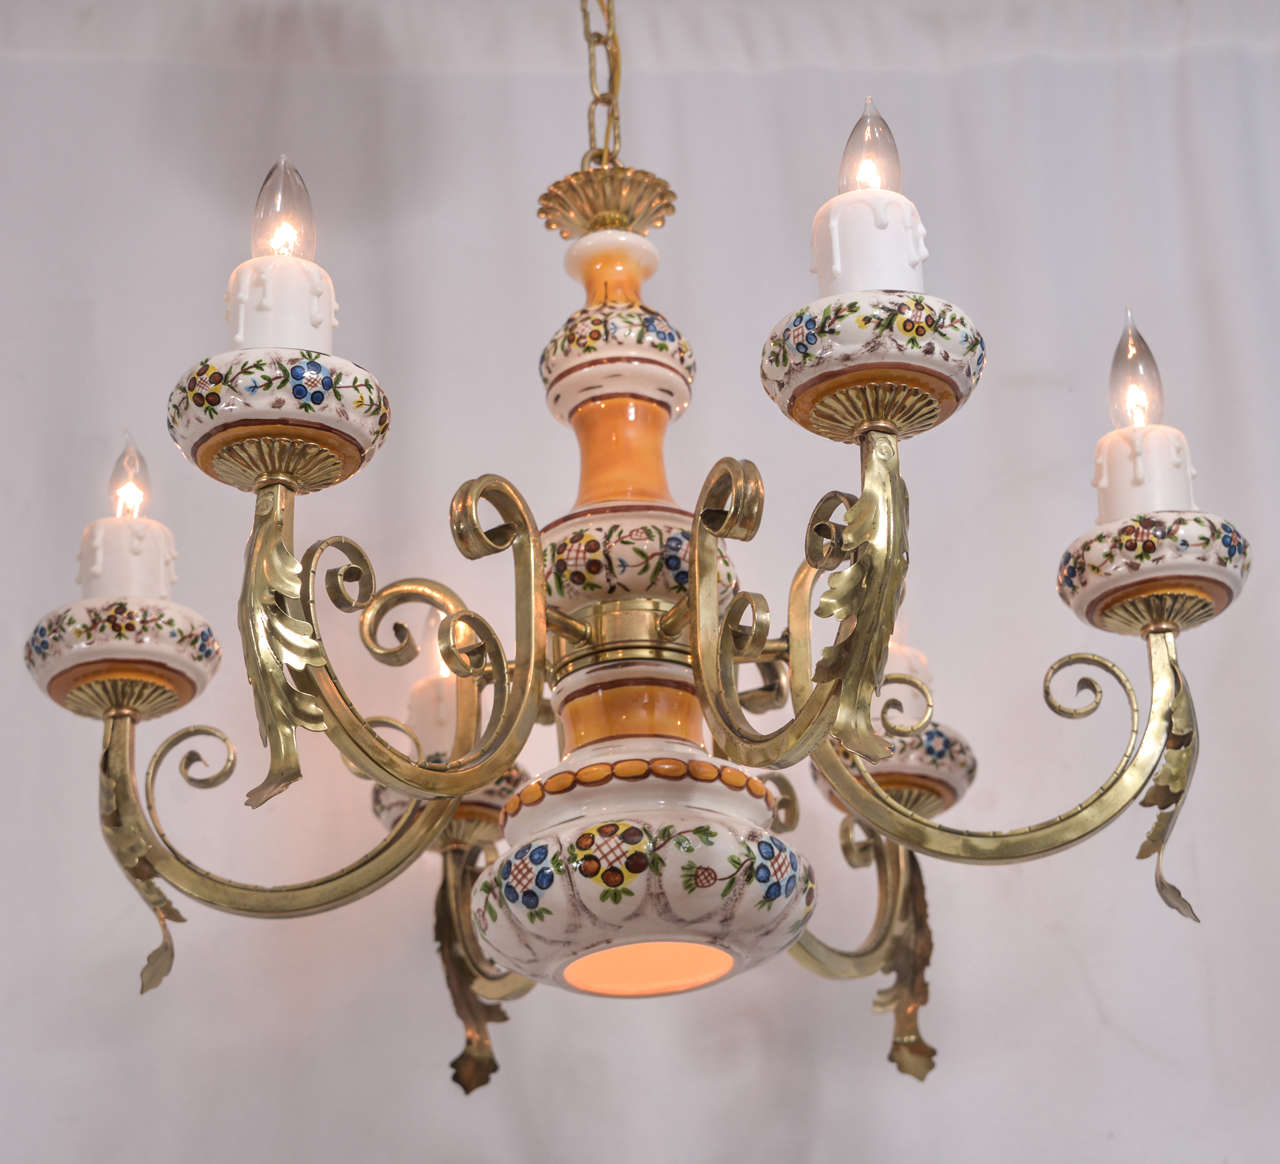 Country French, hand-painted porcelain, with five candles and one down light featuring gently scrolling arms of brass.